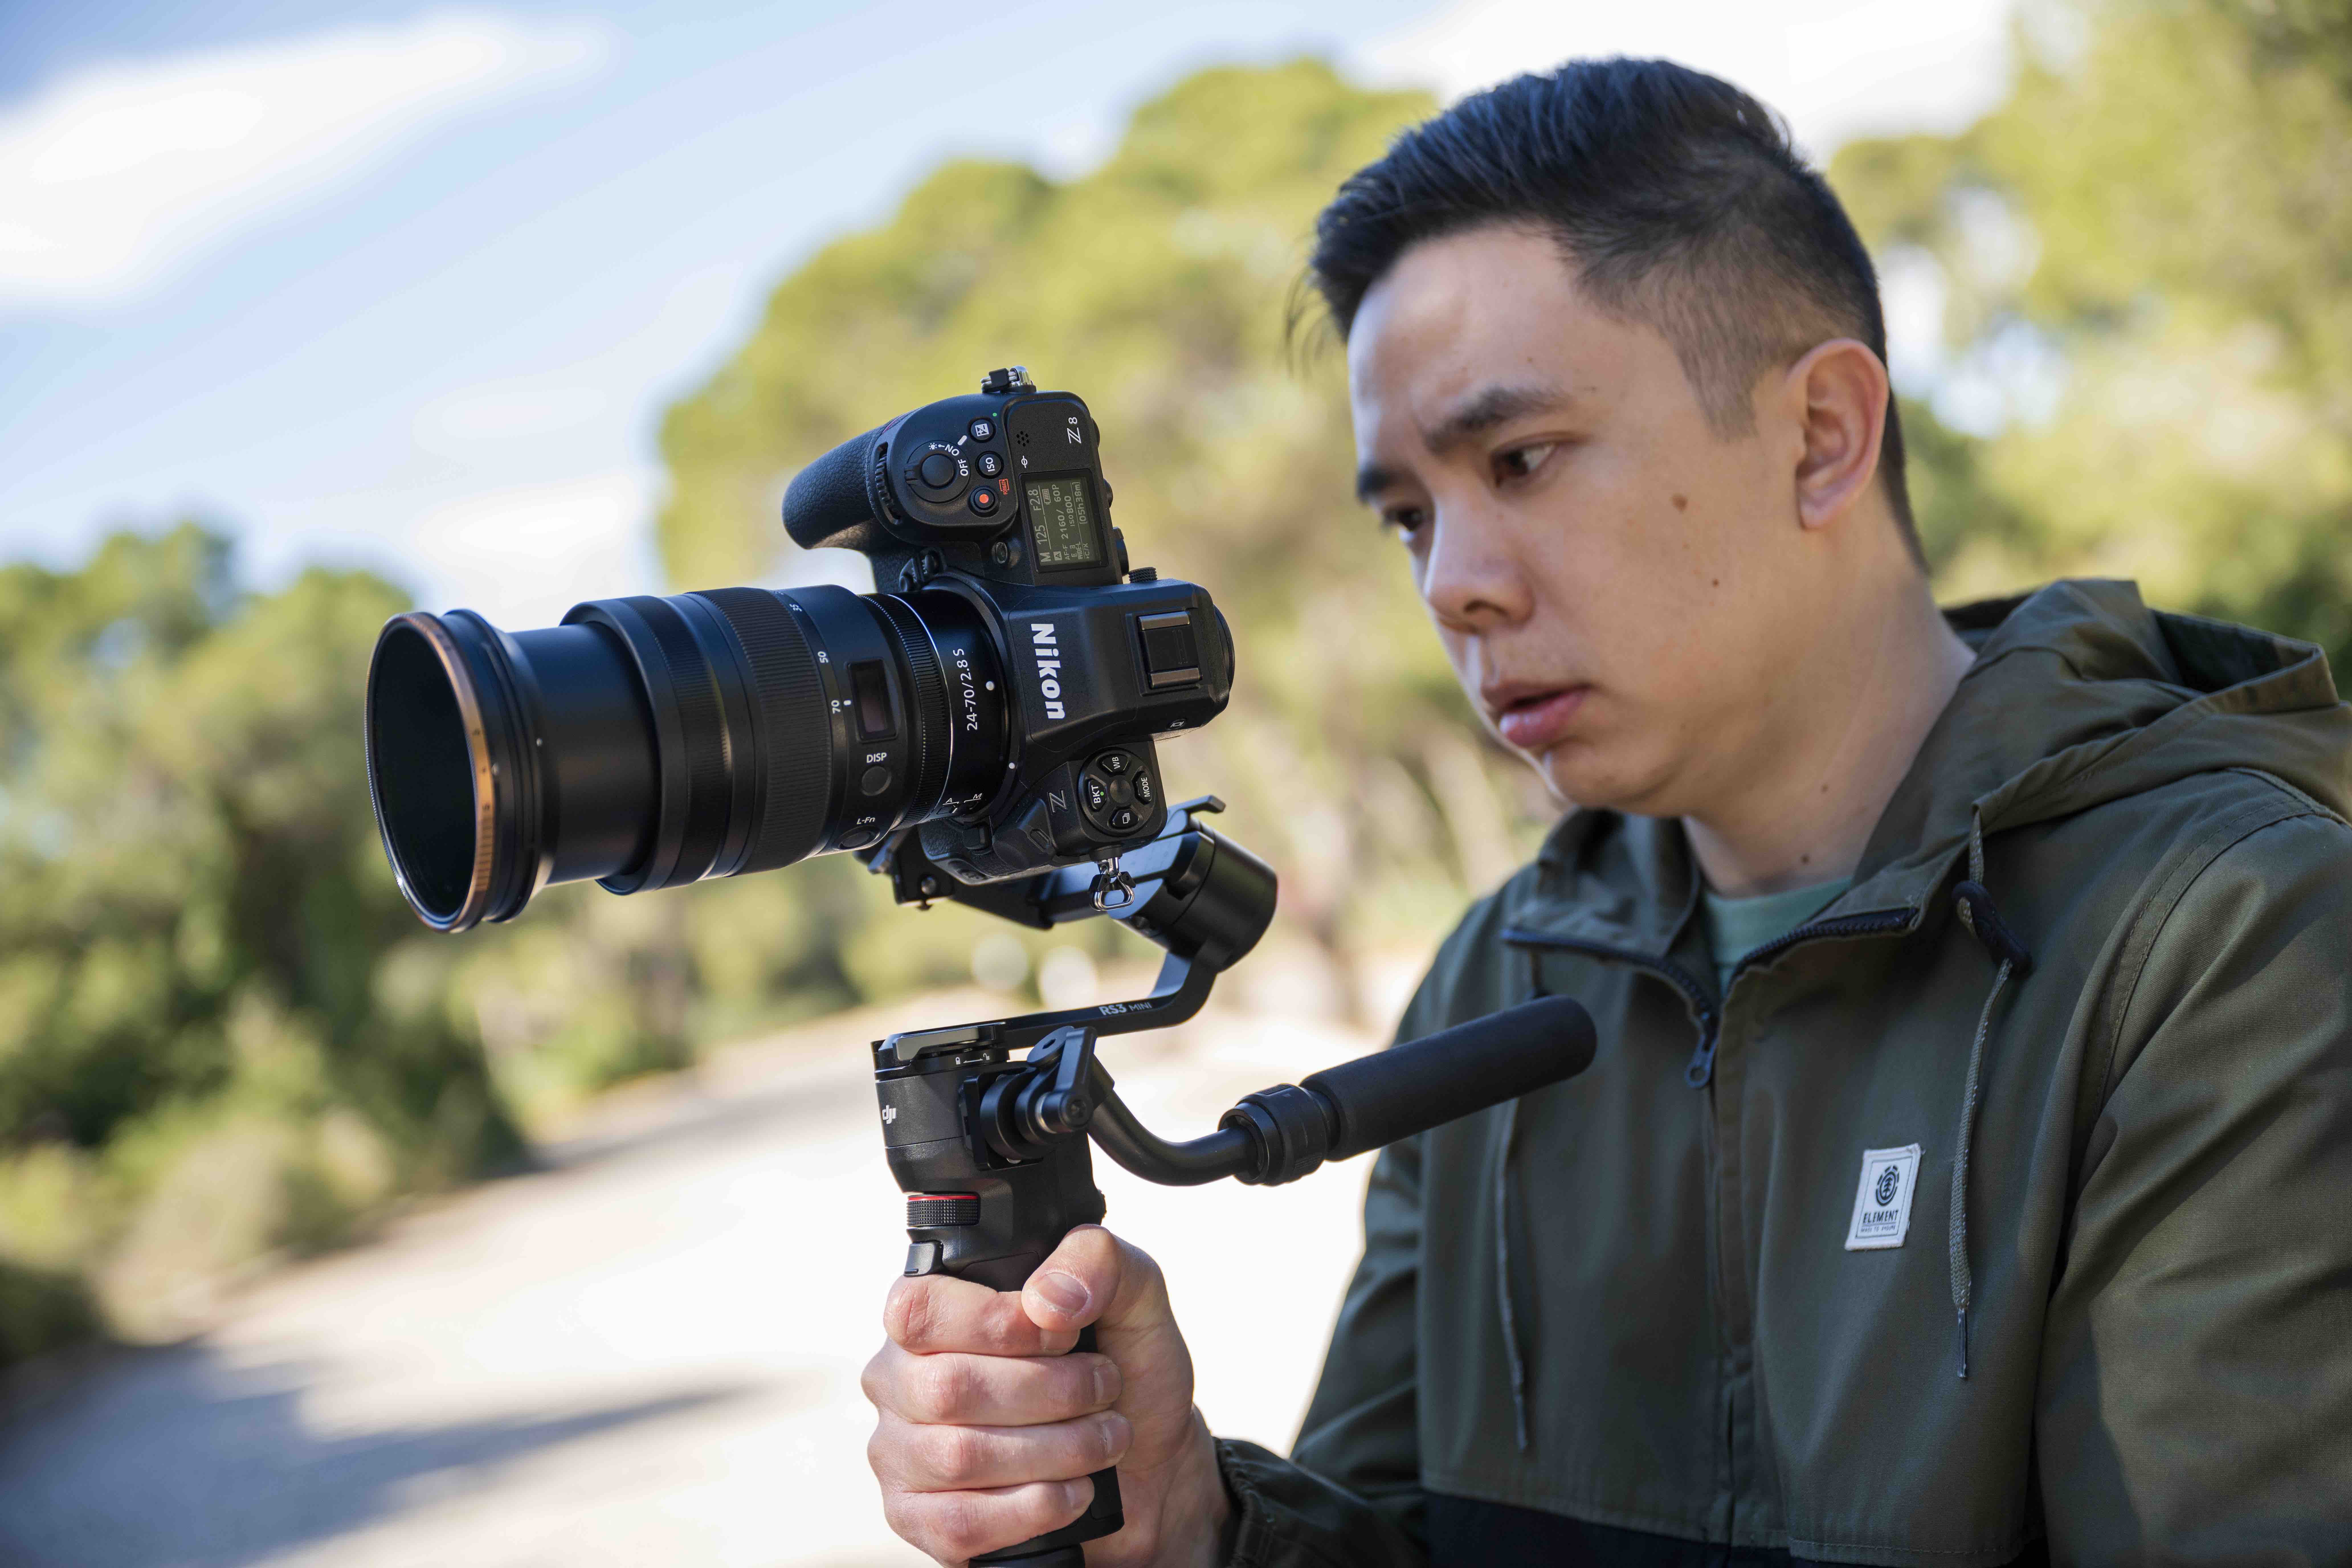 Videography FAQ: What are 8K, 4K, and Full HD? How Do I Use Them?